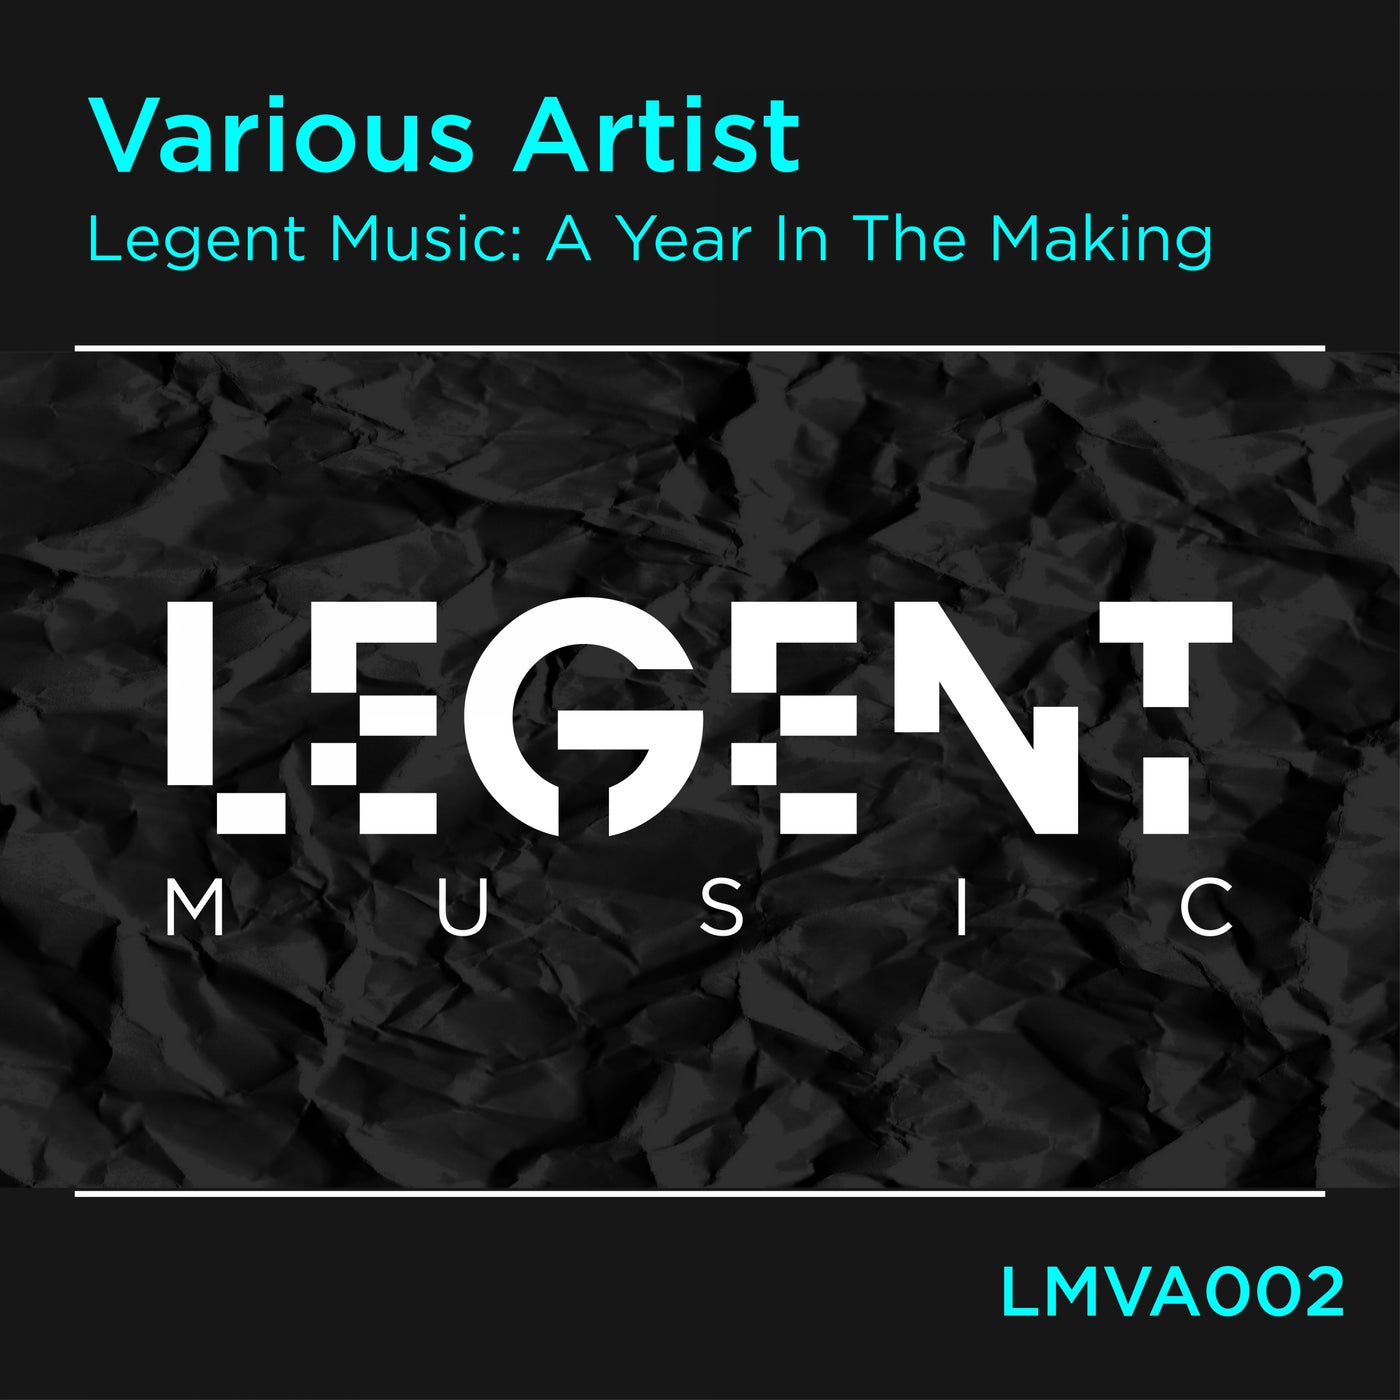 Legent Music: A Year In The Making